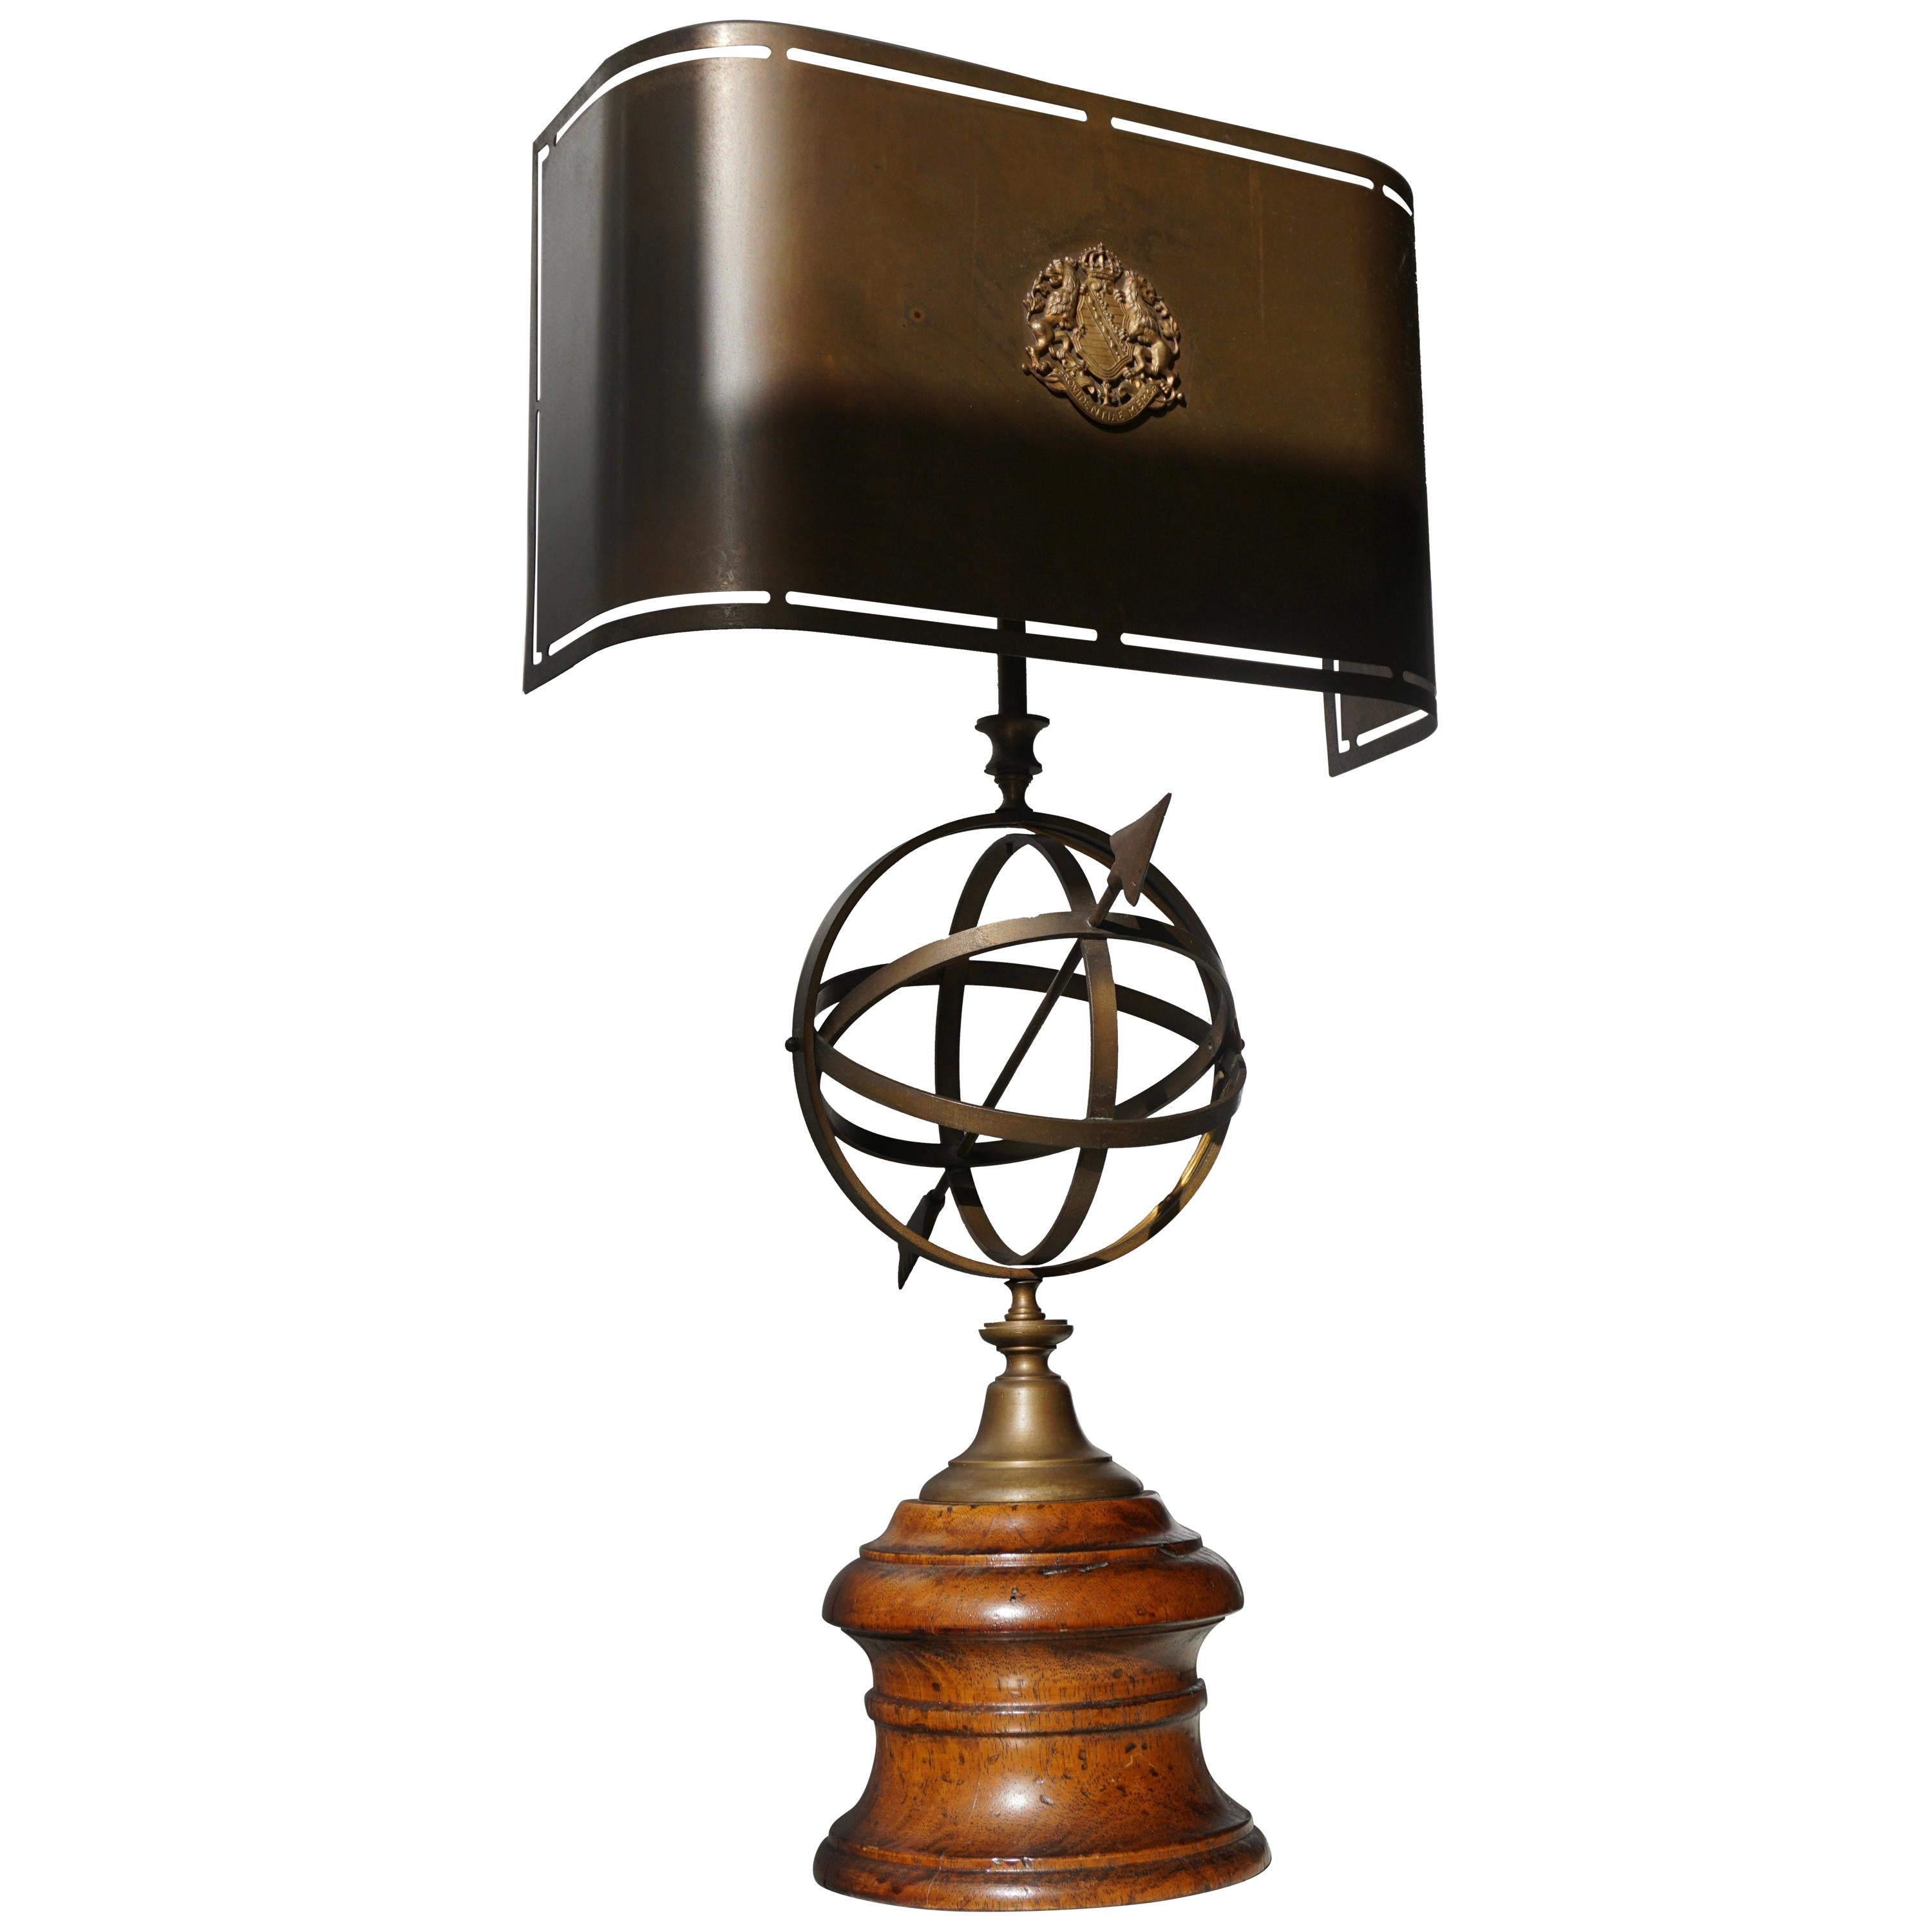 Sundial Table Lamp in Patinated Brass on Wooden Base